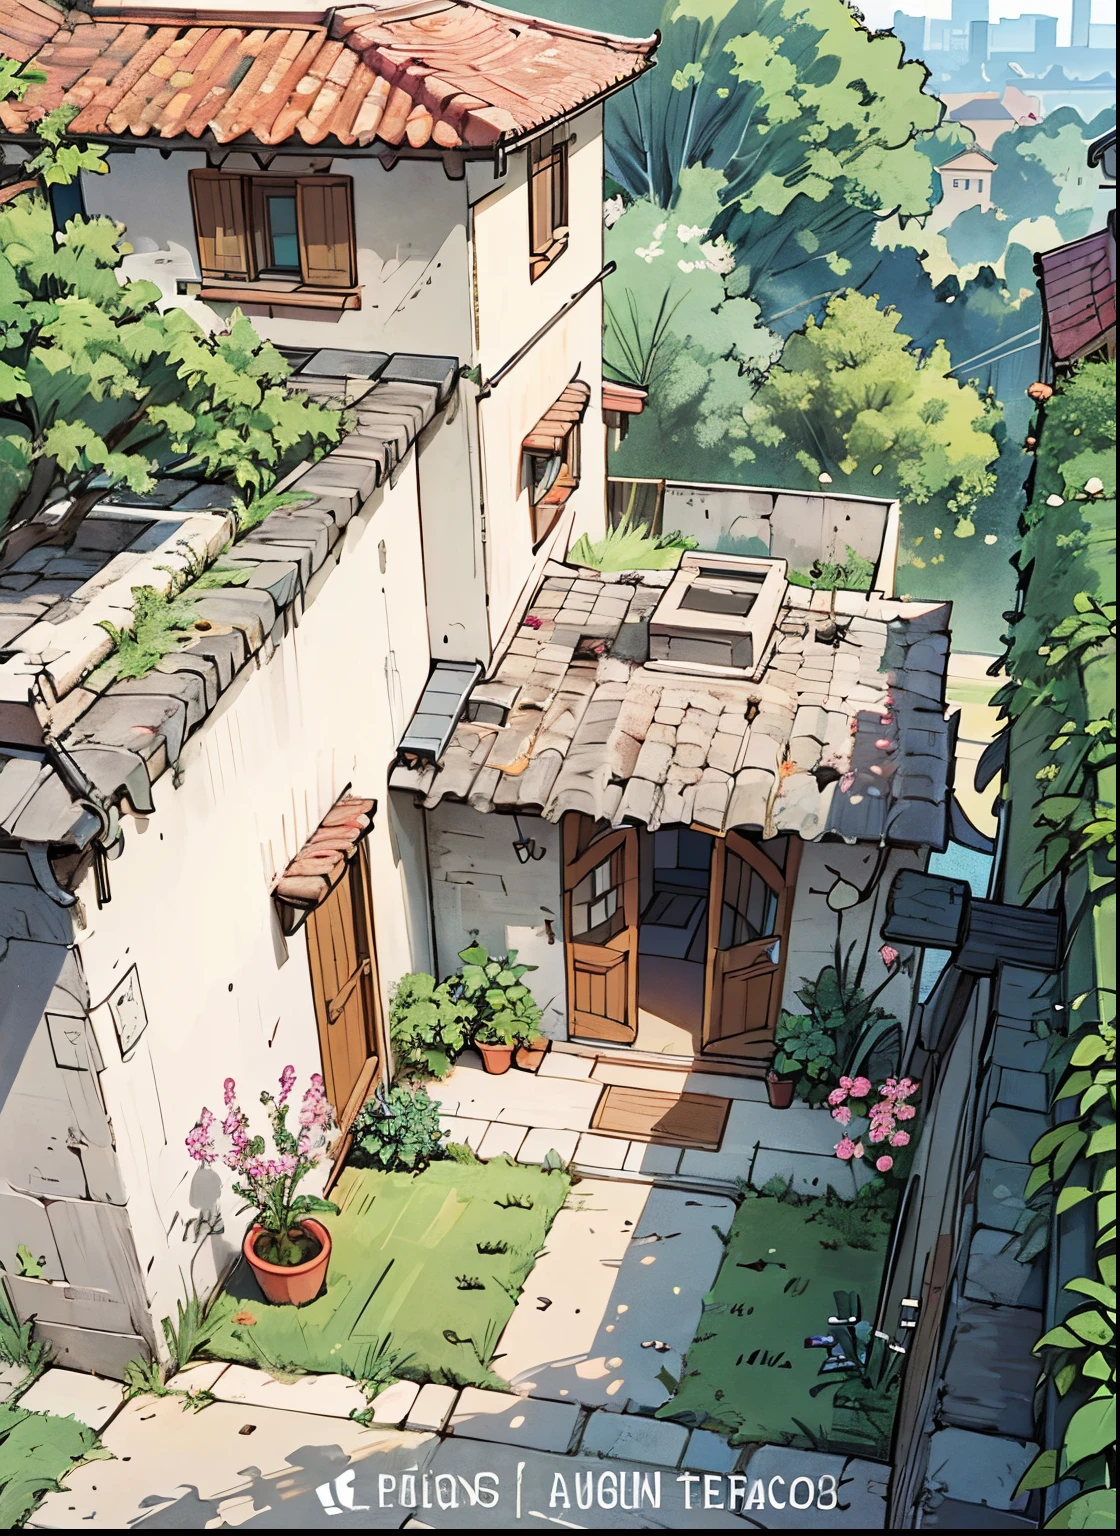 Patio of a house. grass and plants. anime background